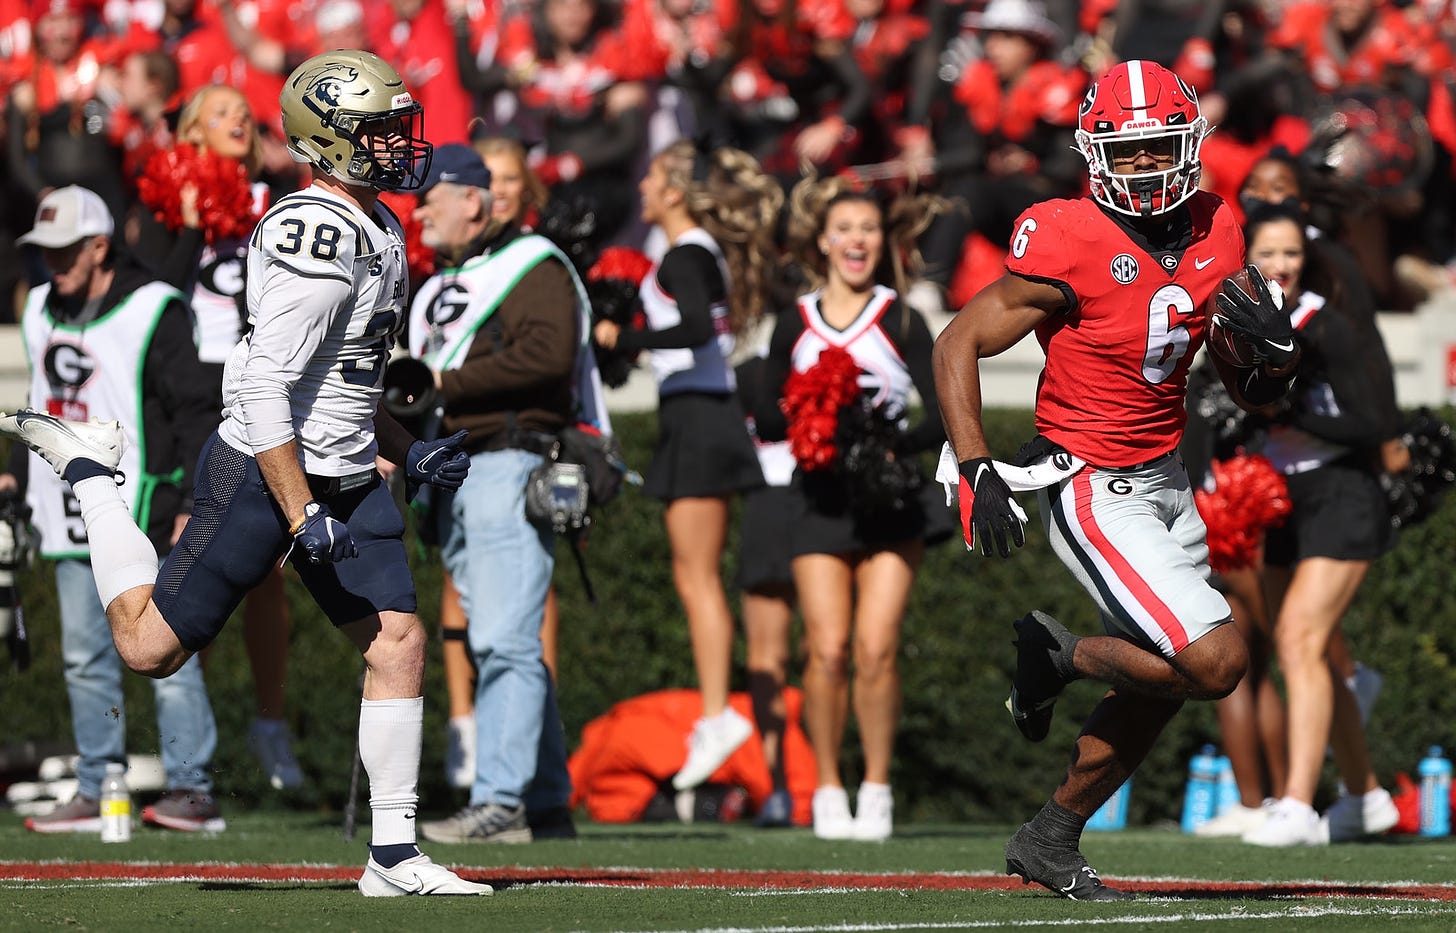 Georgia running back Kenny McIntosh (6) during the Bulldogs' game with Charleston Southern at Dooley Field at Sanford Stadium in Athens, Ga., on Saturday, Nov. 20, 2021. (Photo by Mackenzie Miles)